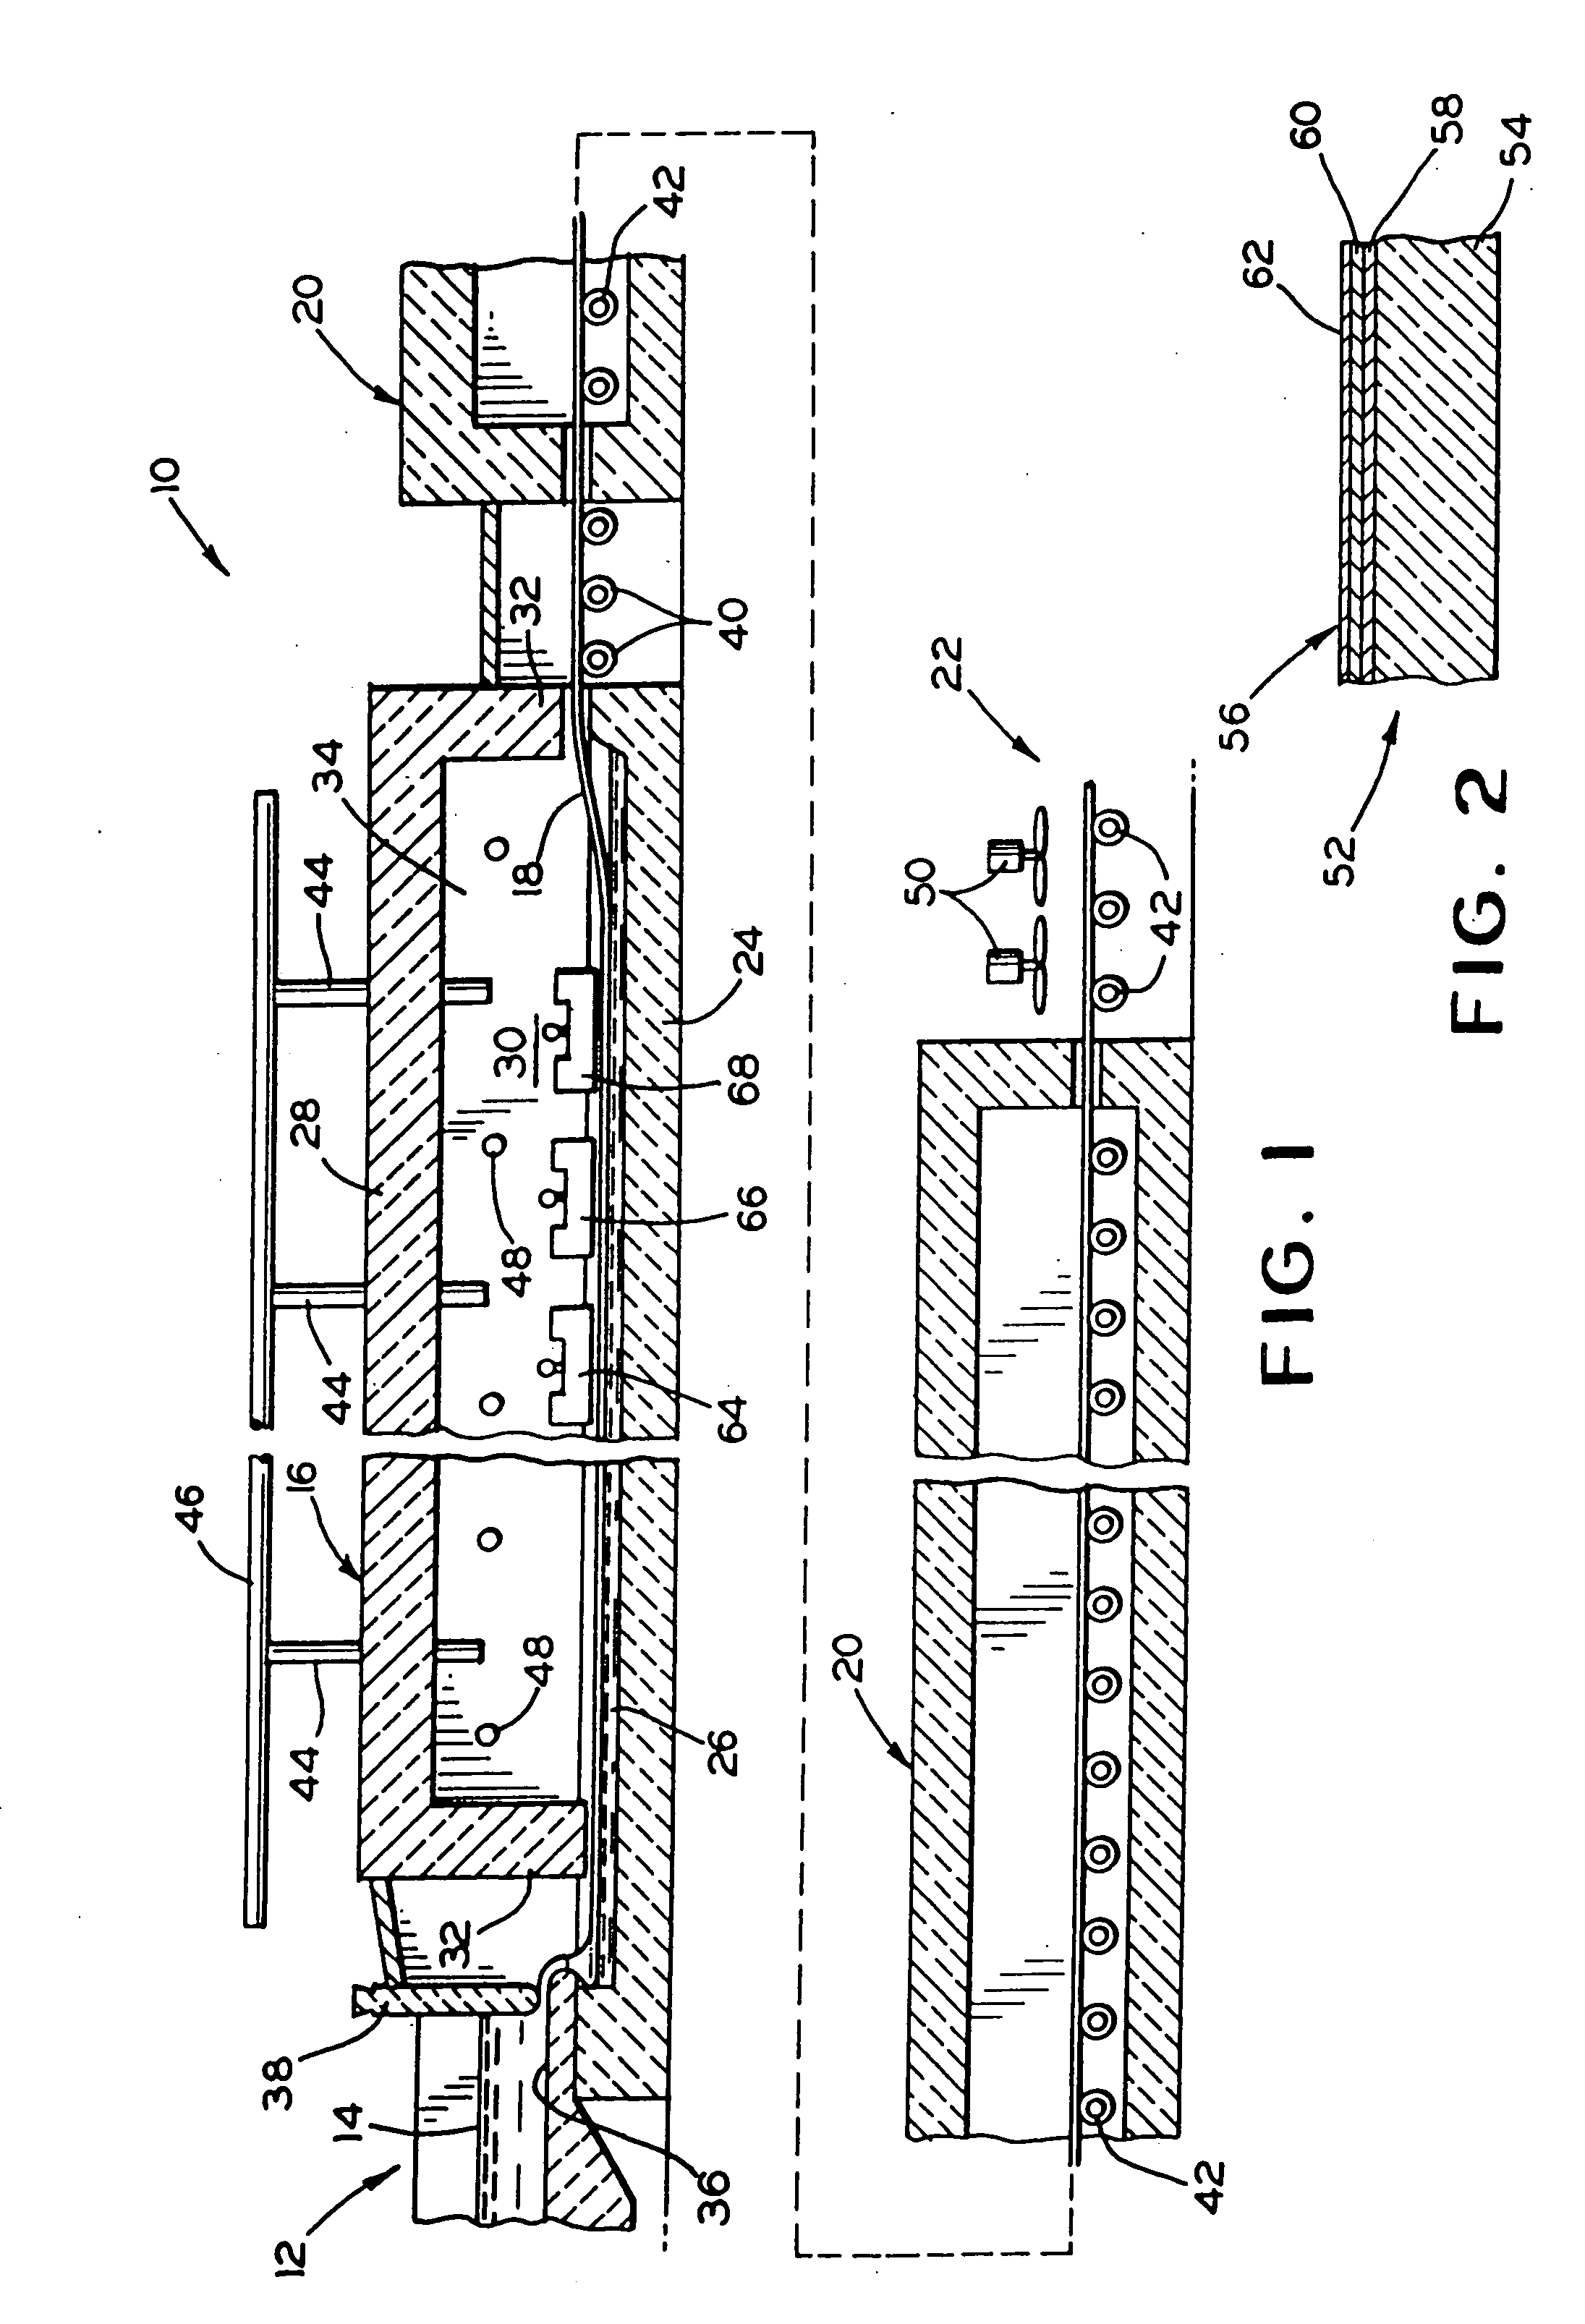 Method for depositing tin oxide and titanium oxide coatings on flat glass and the resulting coated glass